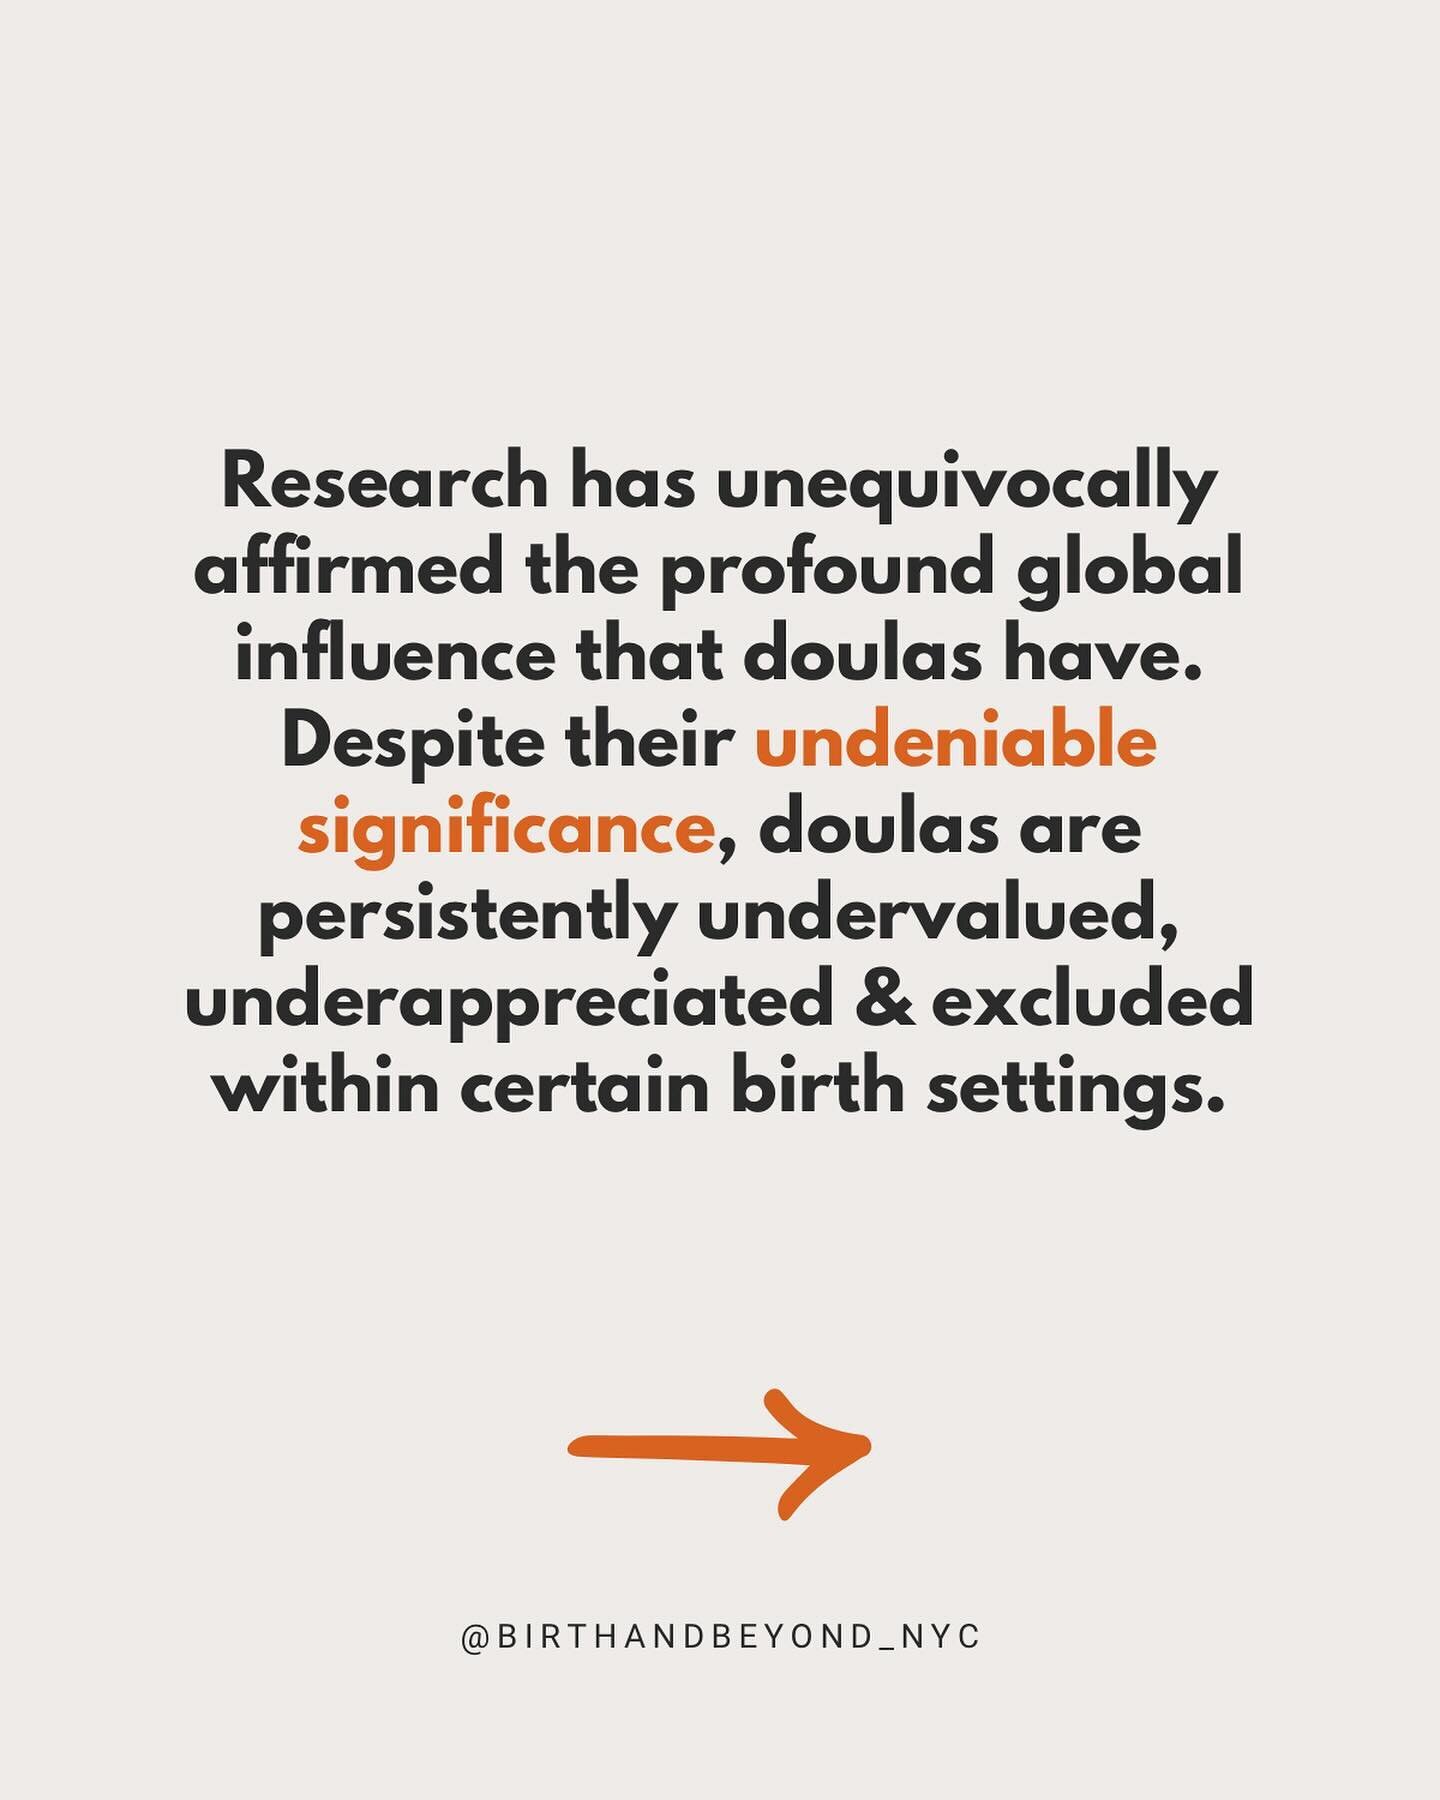 Reposting bc of a typo 😩 (thank you friend).

Research has definitely backed the importance of doulas. 

If we look at research, we are able to see the bigger picture. Cause &amp; effect. It&rsquo;s important to see cause &amp; effect if the goal is